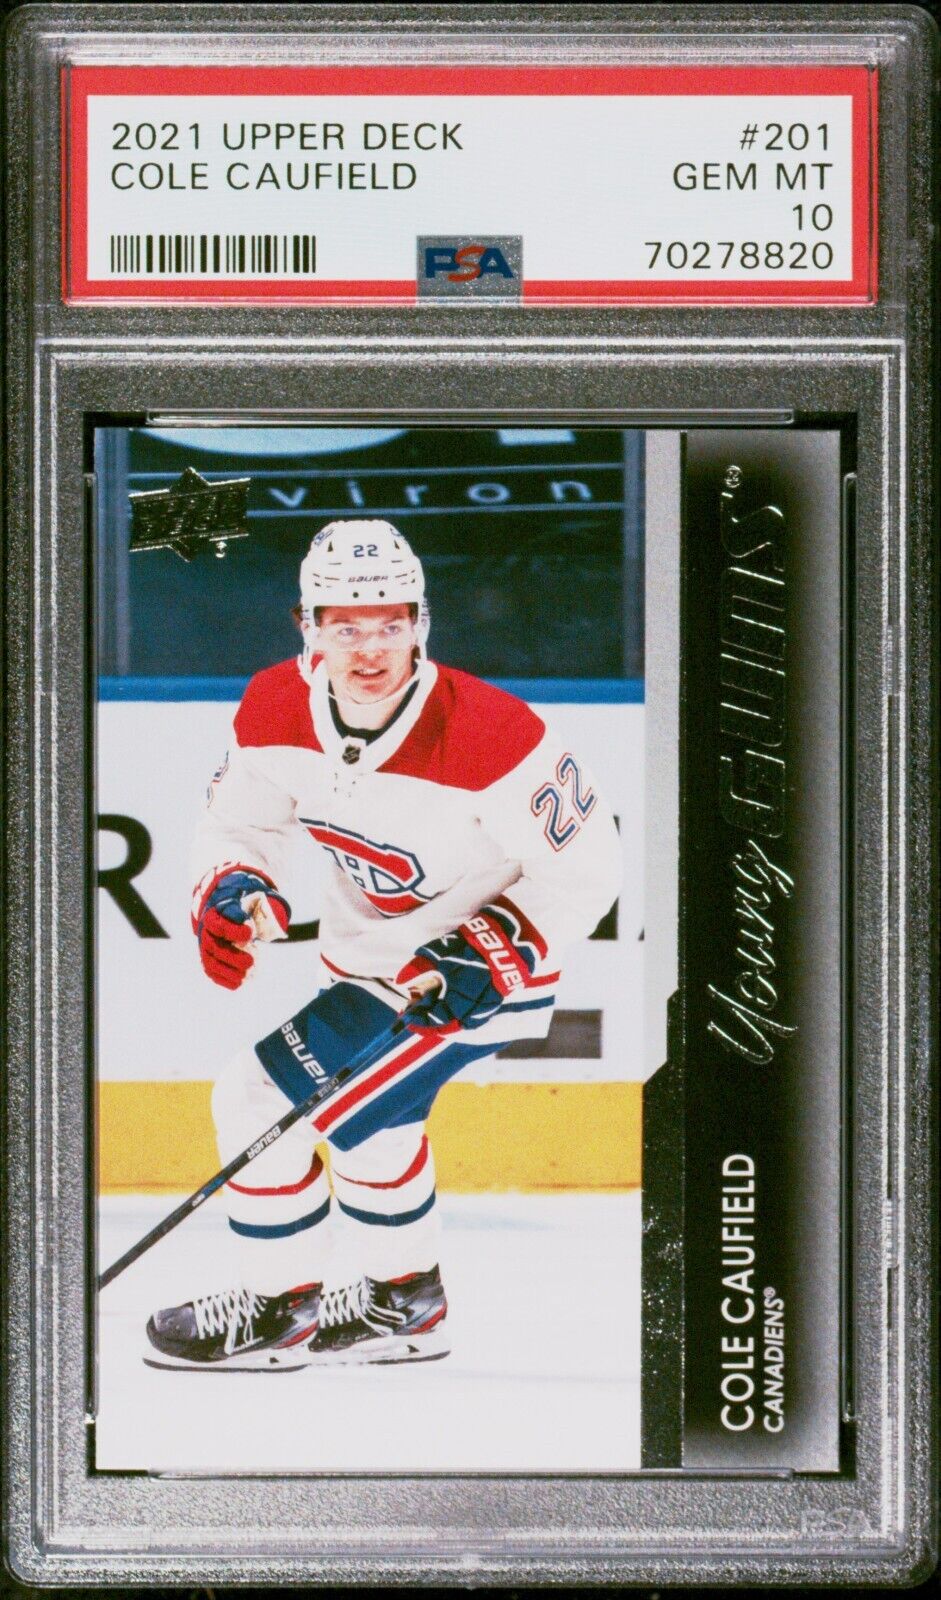 2021/22 Upper Deck Hockey Young Guns #201 Cole Caufield Rookie Card RC PSA 10 - 643-collectibles